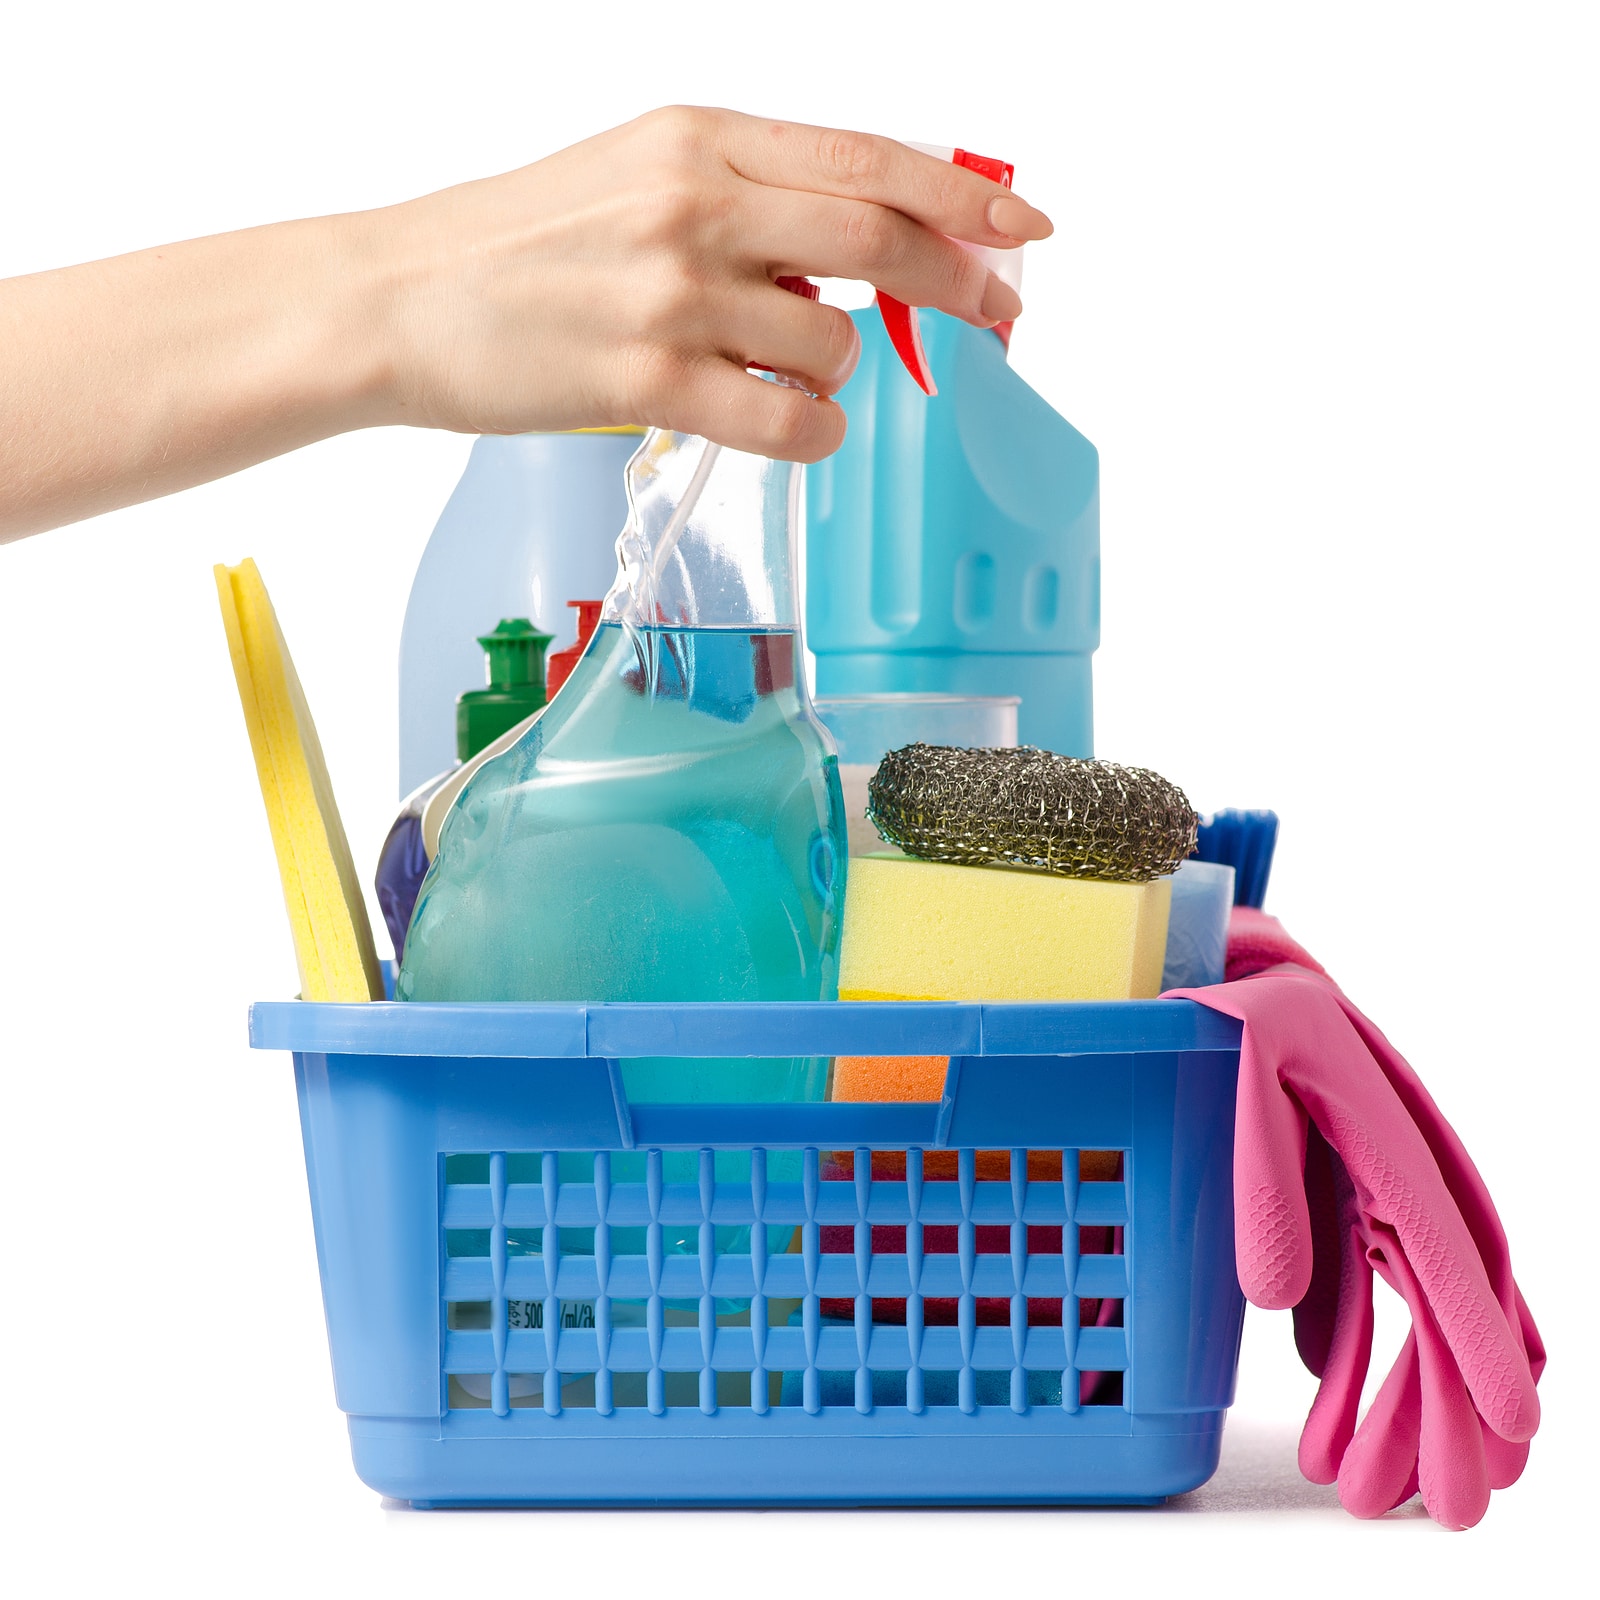 Set For Cleaning Cleanliness In A Basket Hands On A White Backgr